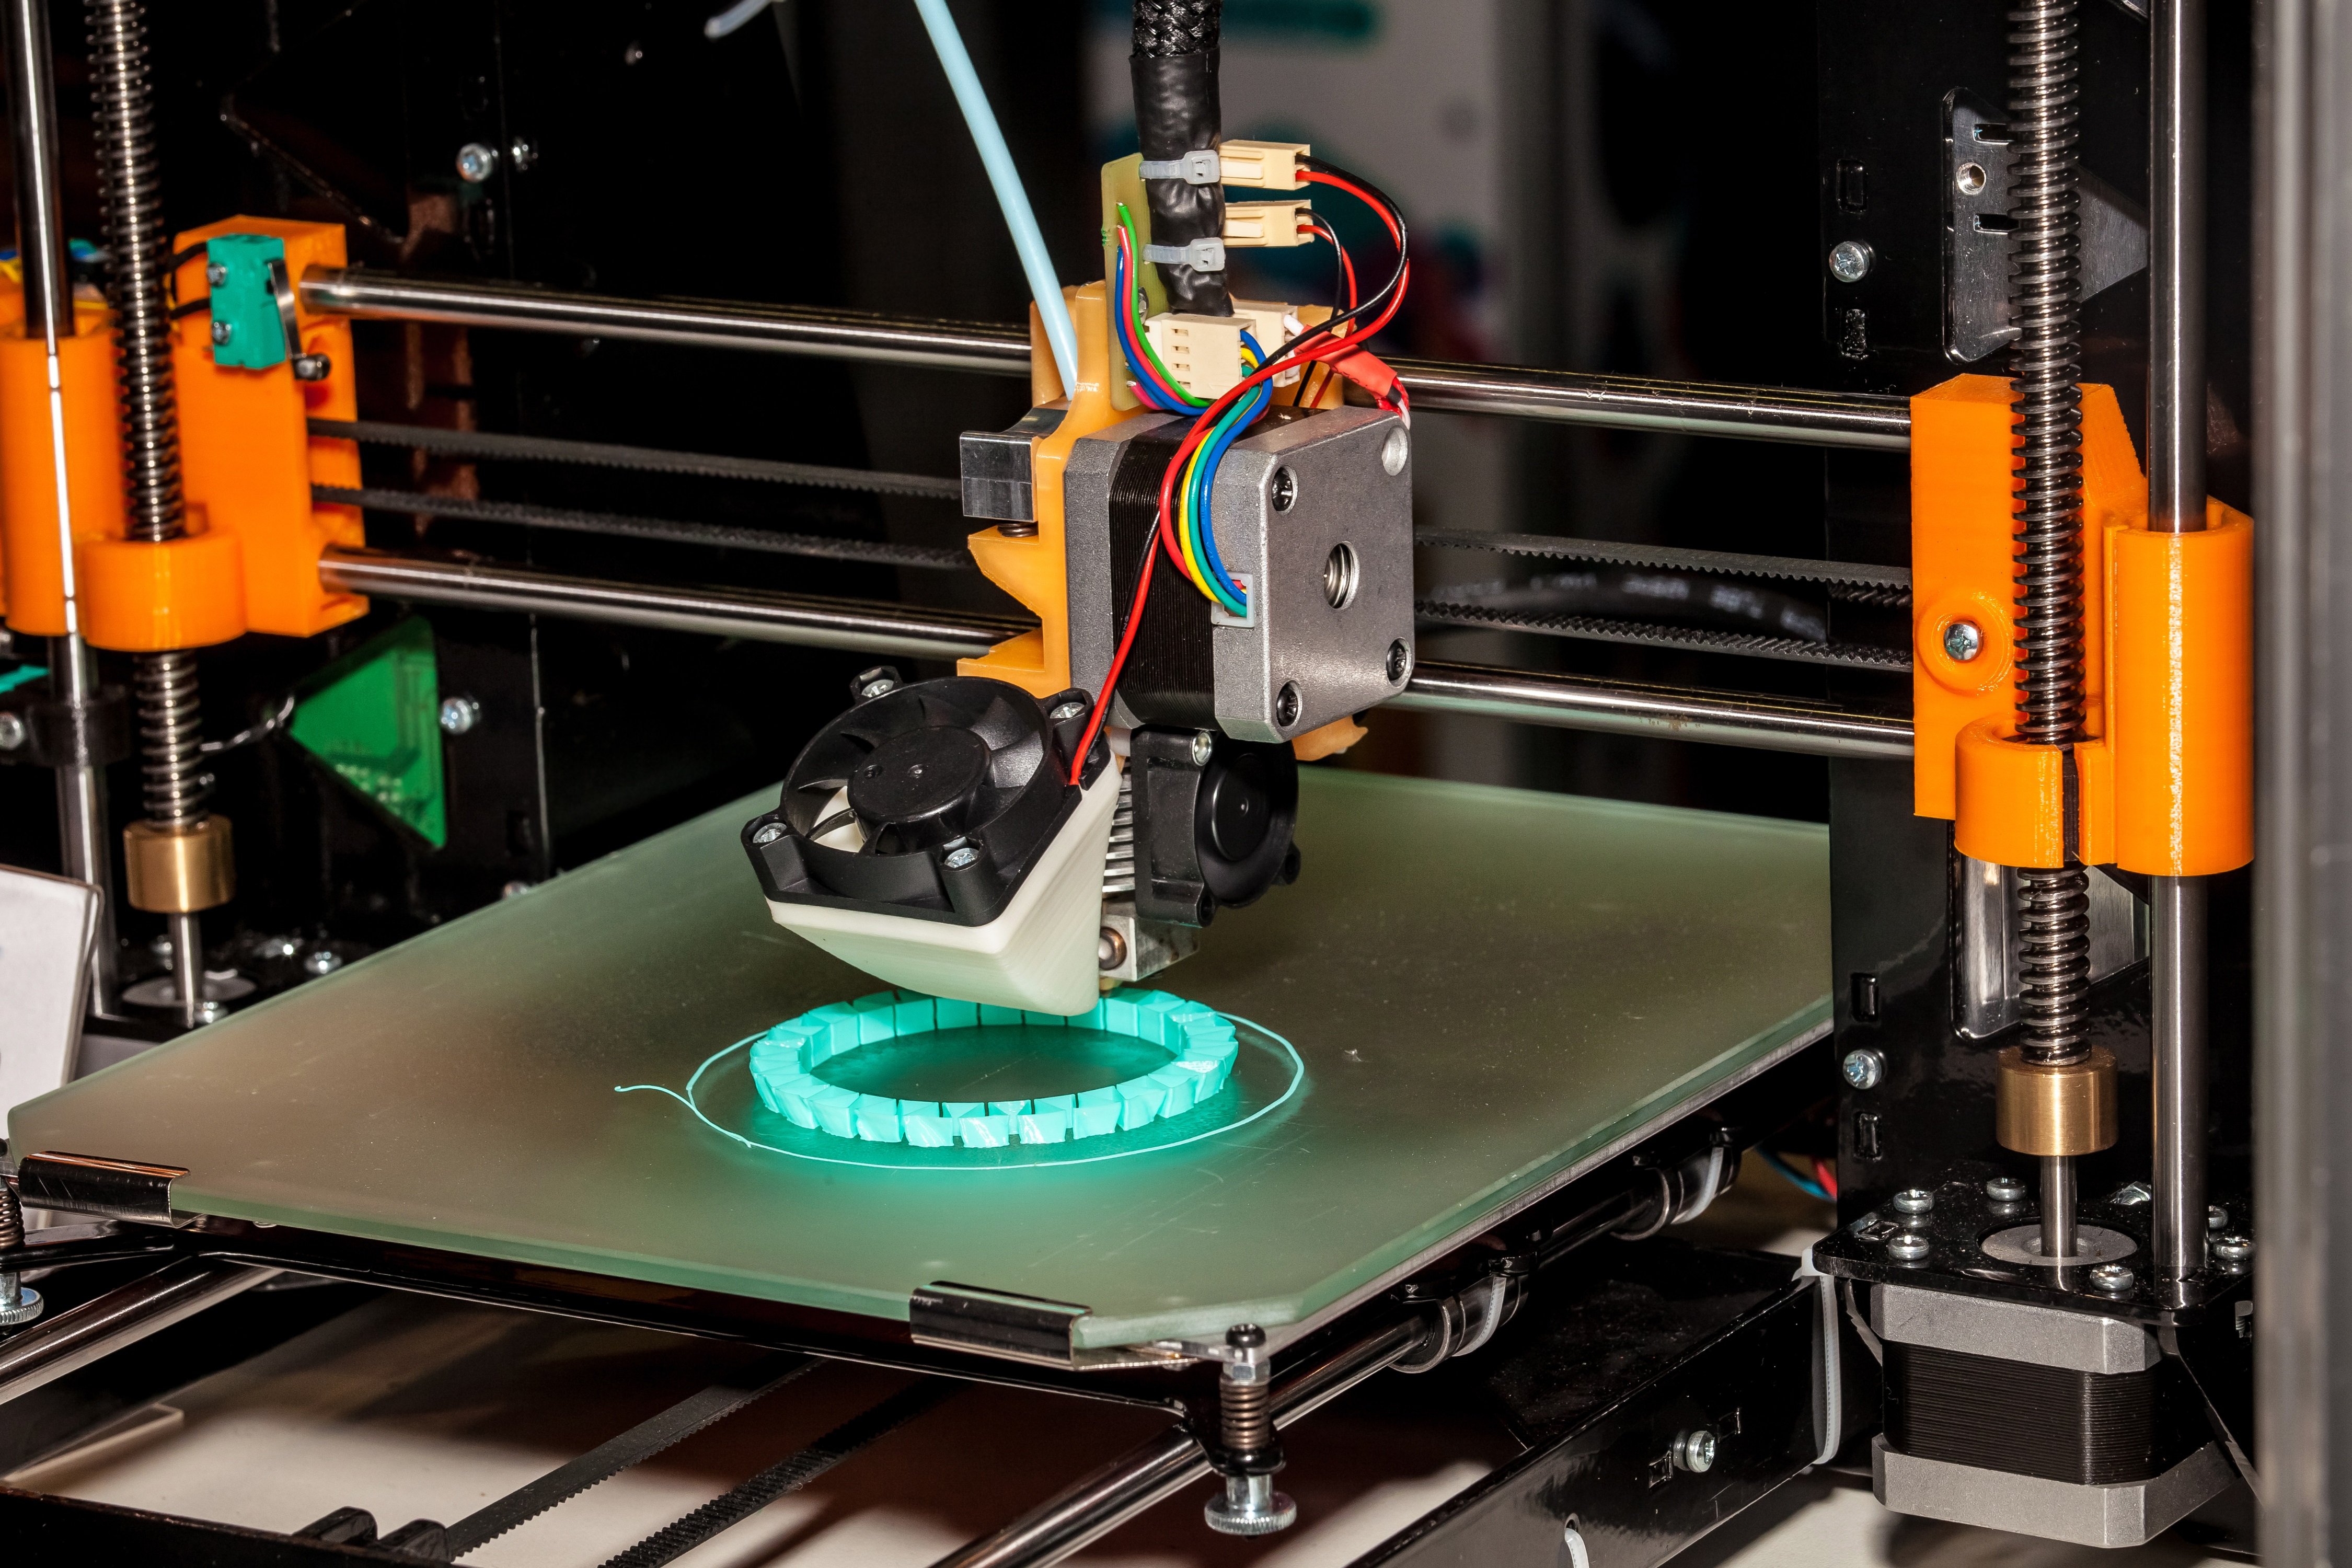 A material extrusion-type 3D printer at work printing a circular object.